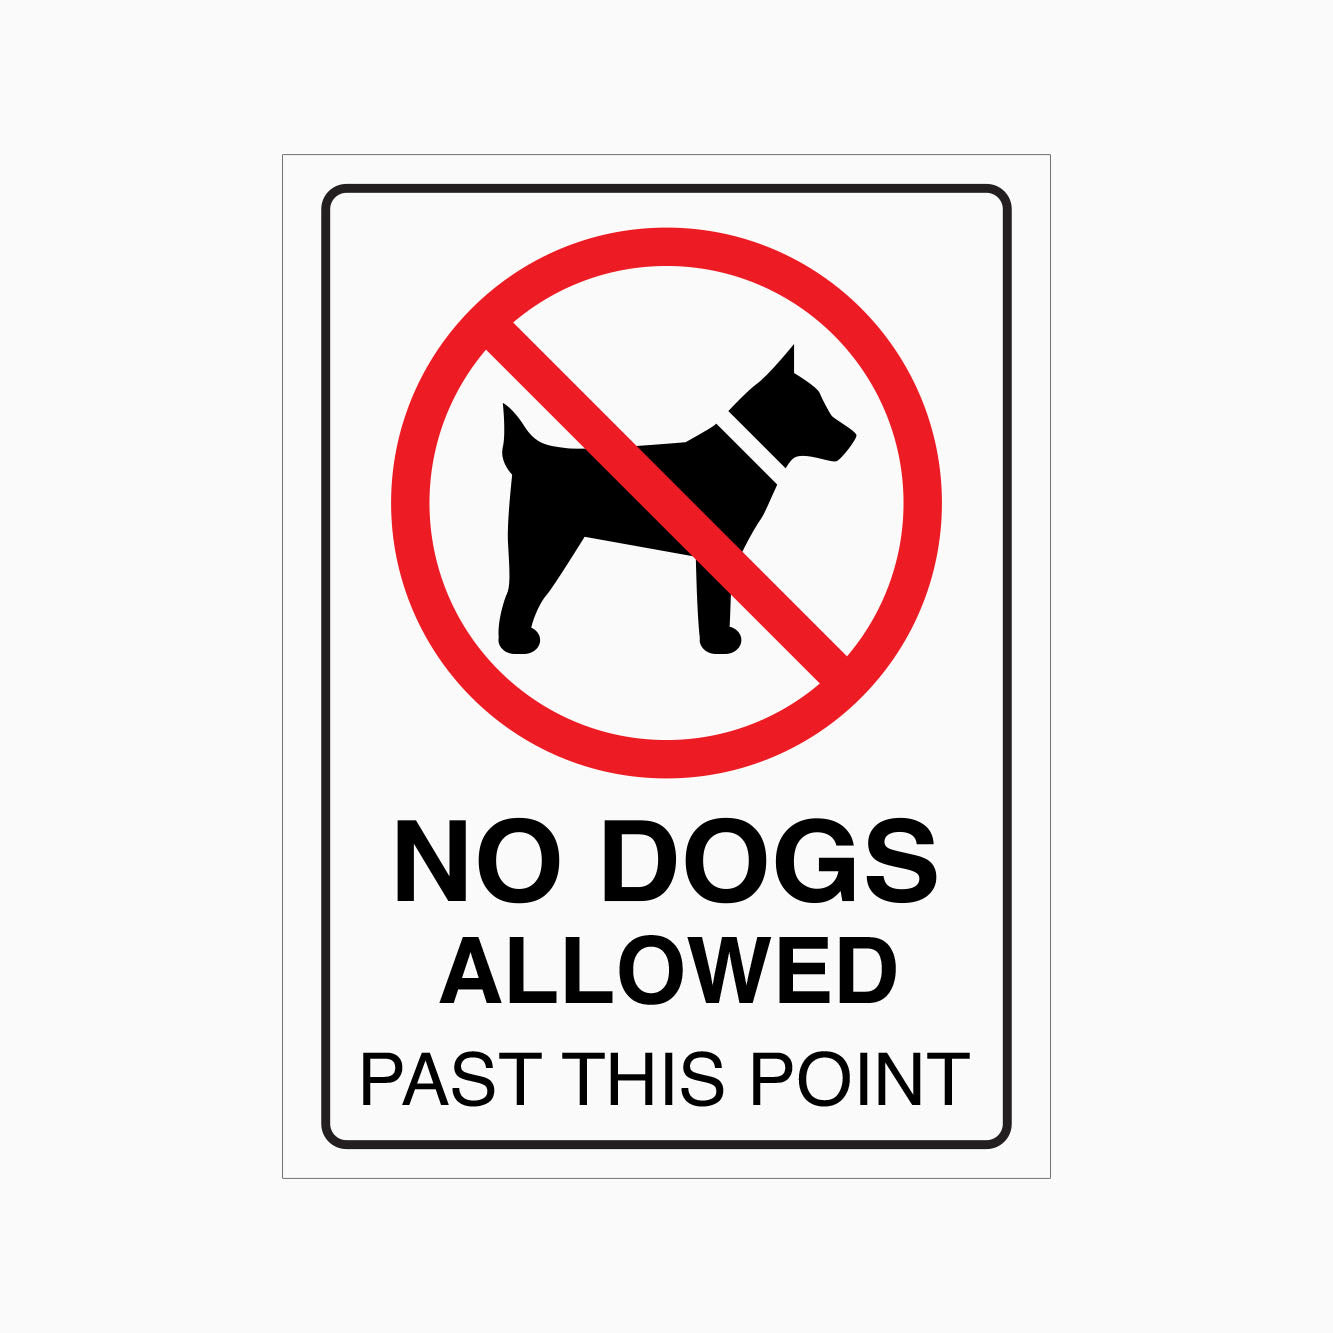 NO DOGS ALLOWED PAST THIS POINT SIGN